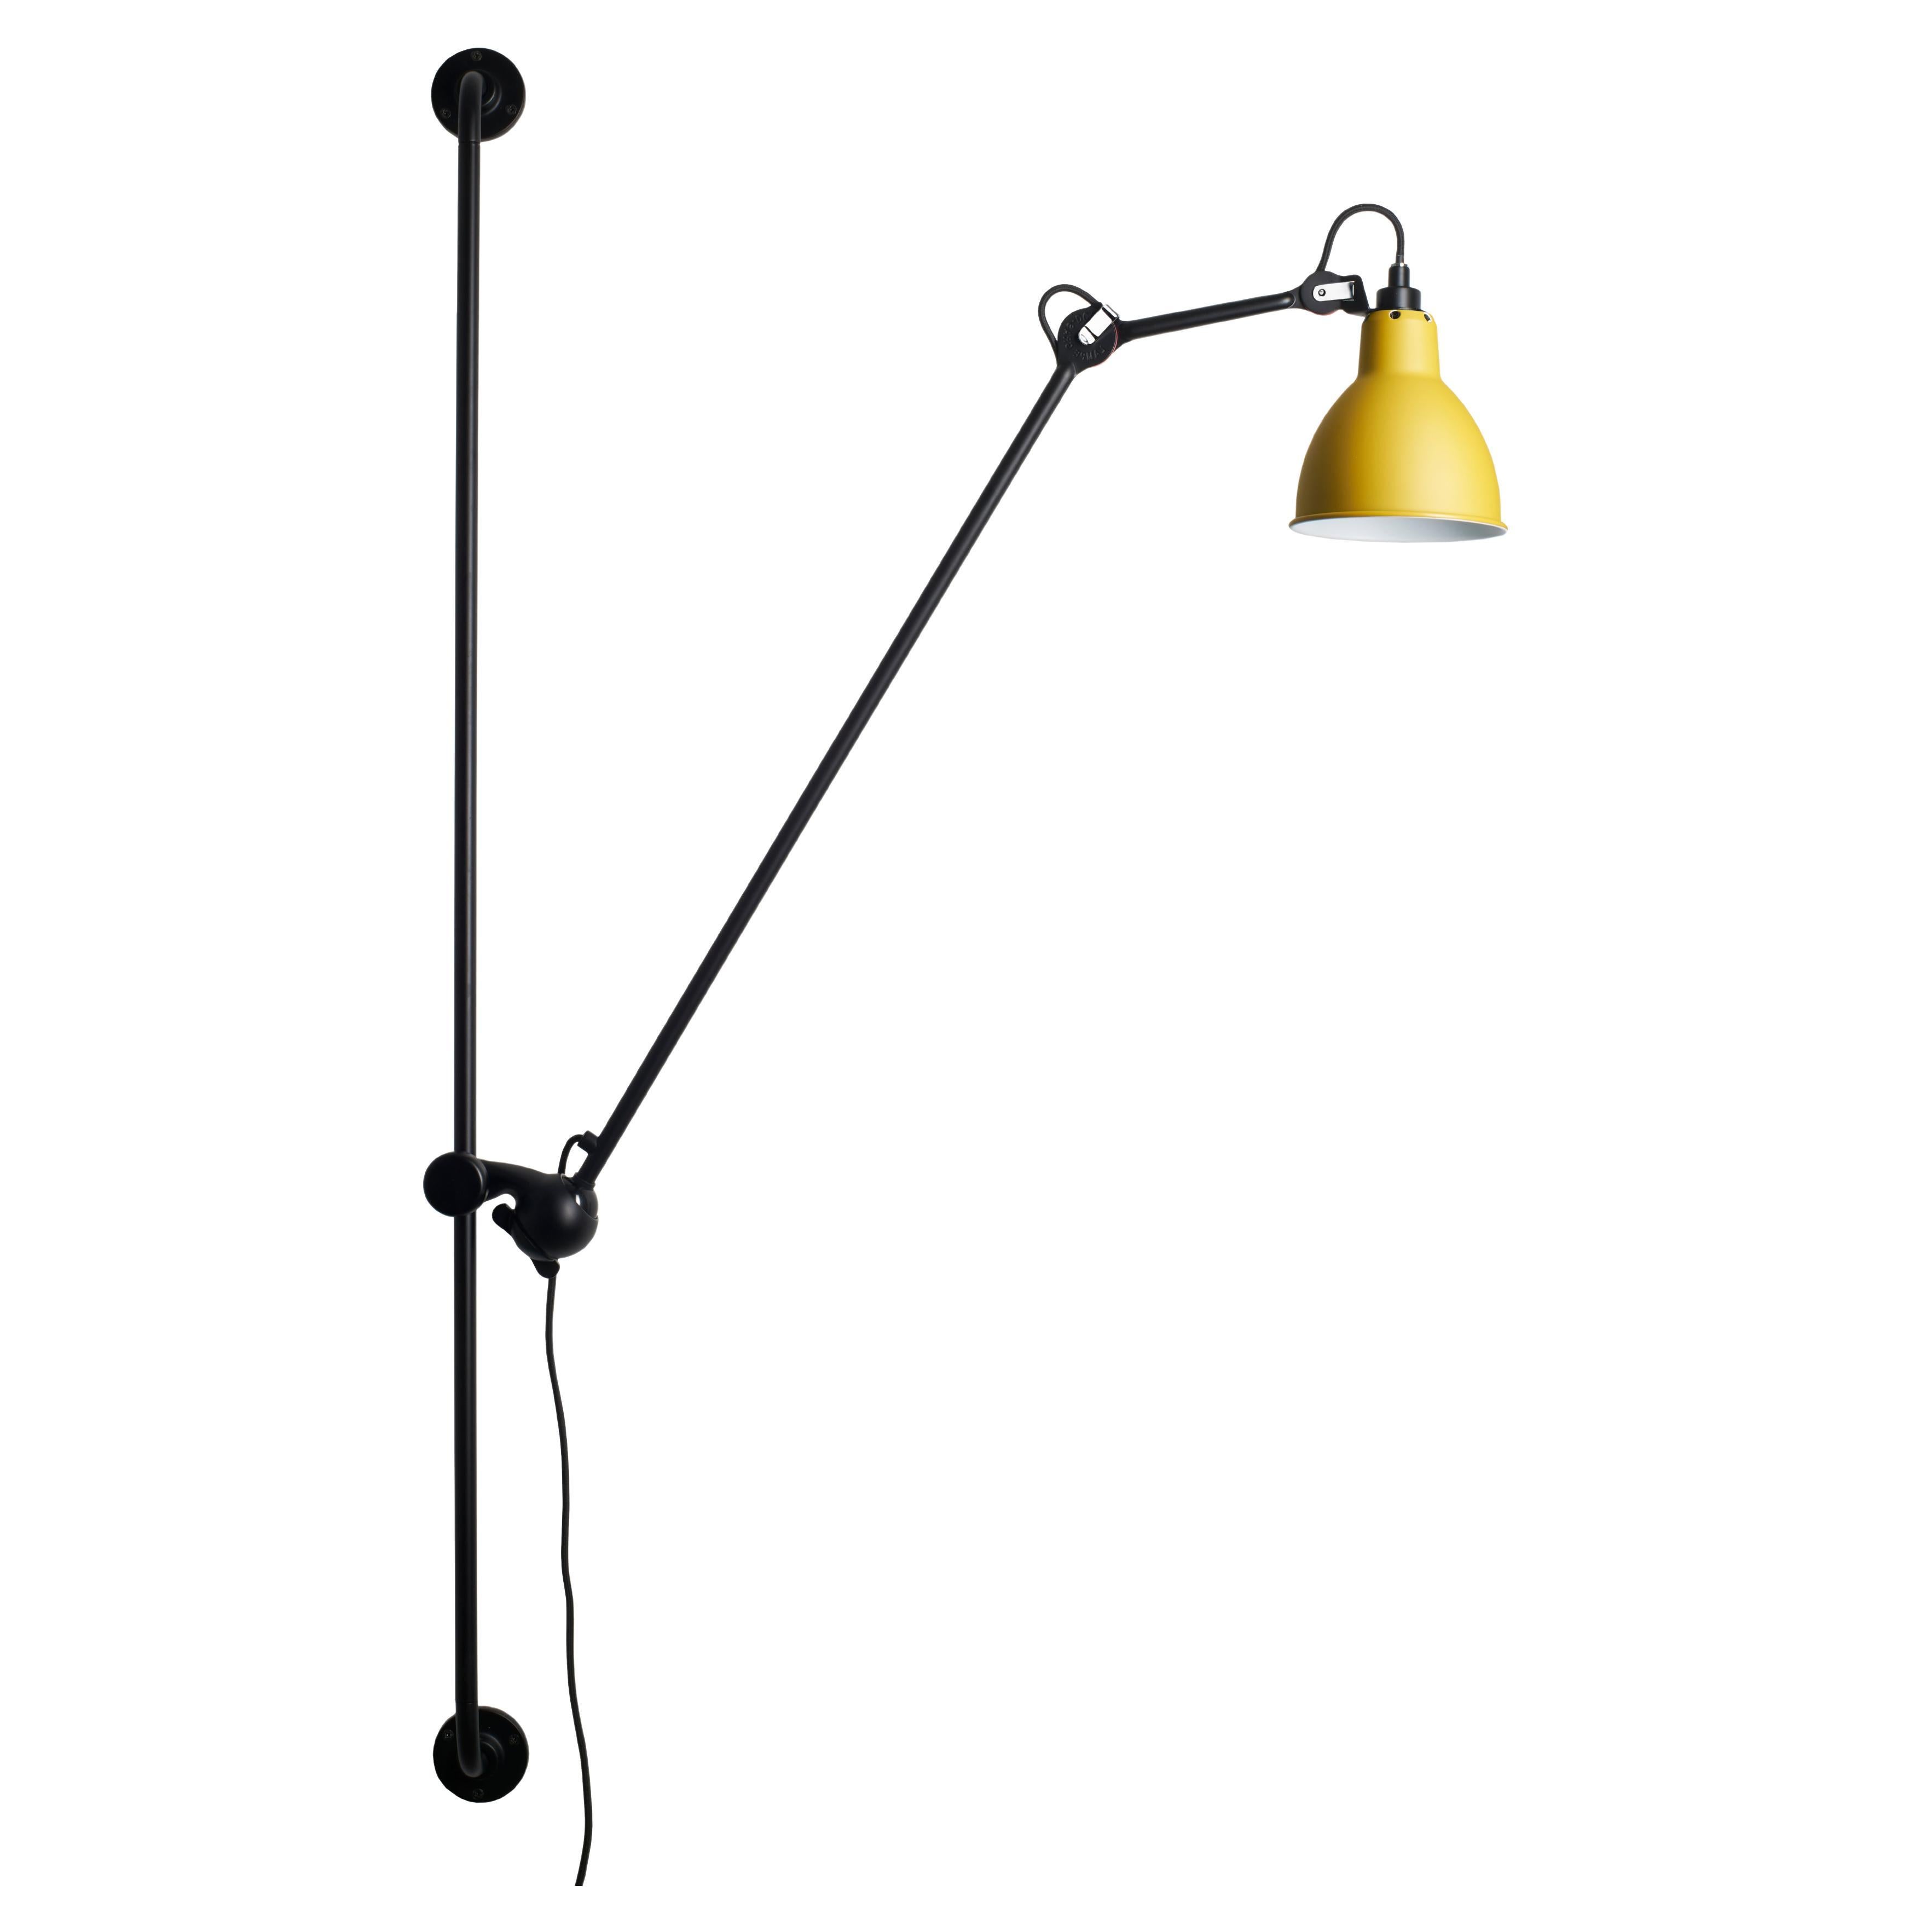 DCW Editions La Lampe Gras N°214 Round Wall Lamp in Black Arm and Yellow Shade For Sale